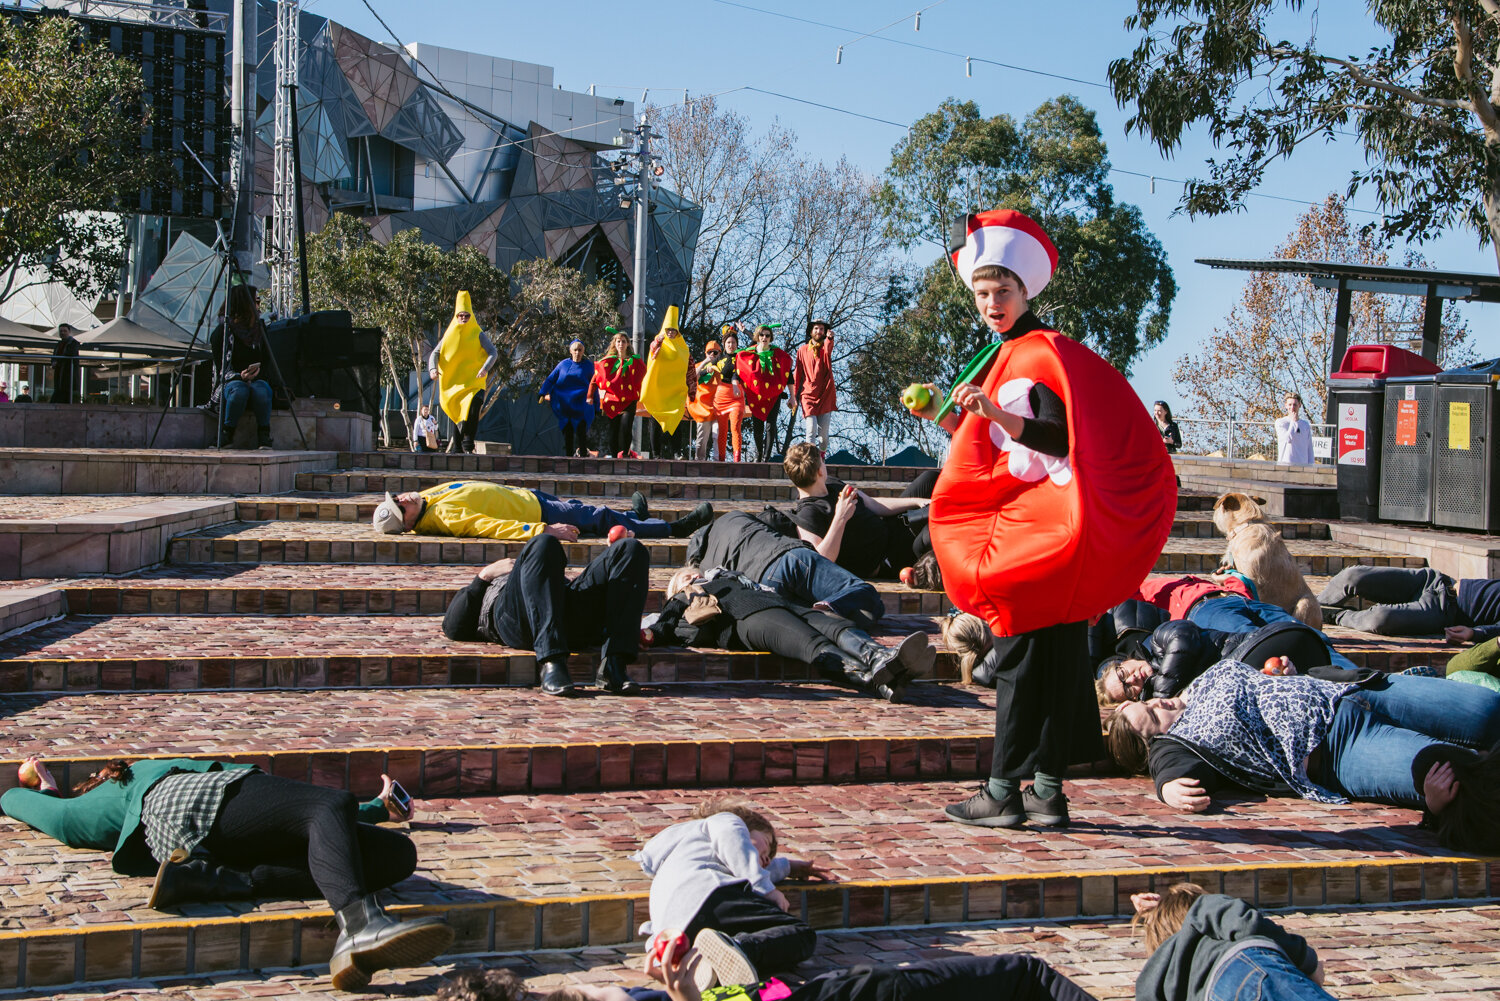 Episode 10 centred around the idea of 'Serious Play', shown by staging a protest of the then in-development Apple Store in Federation Square. 